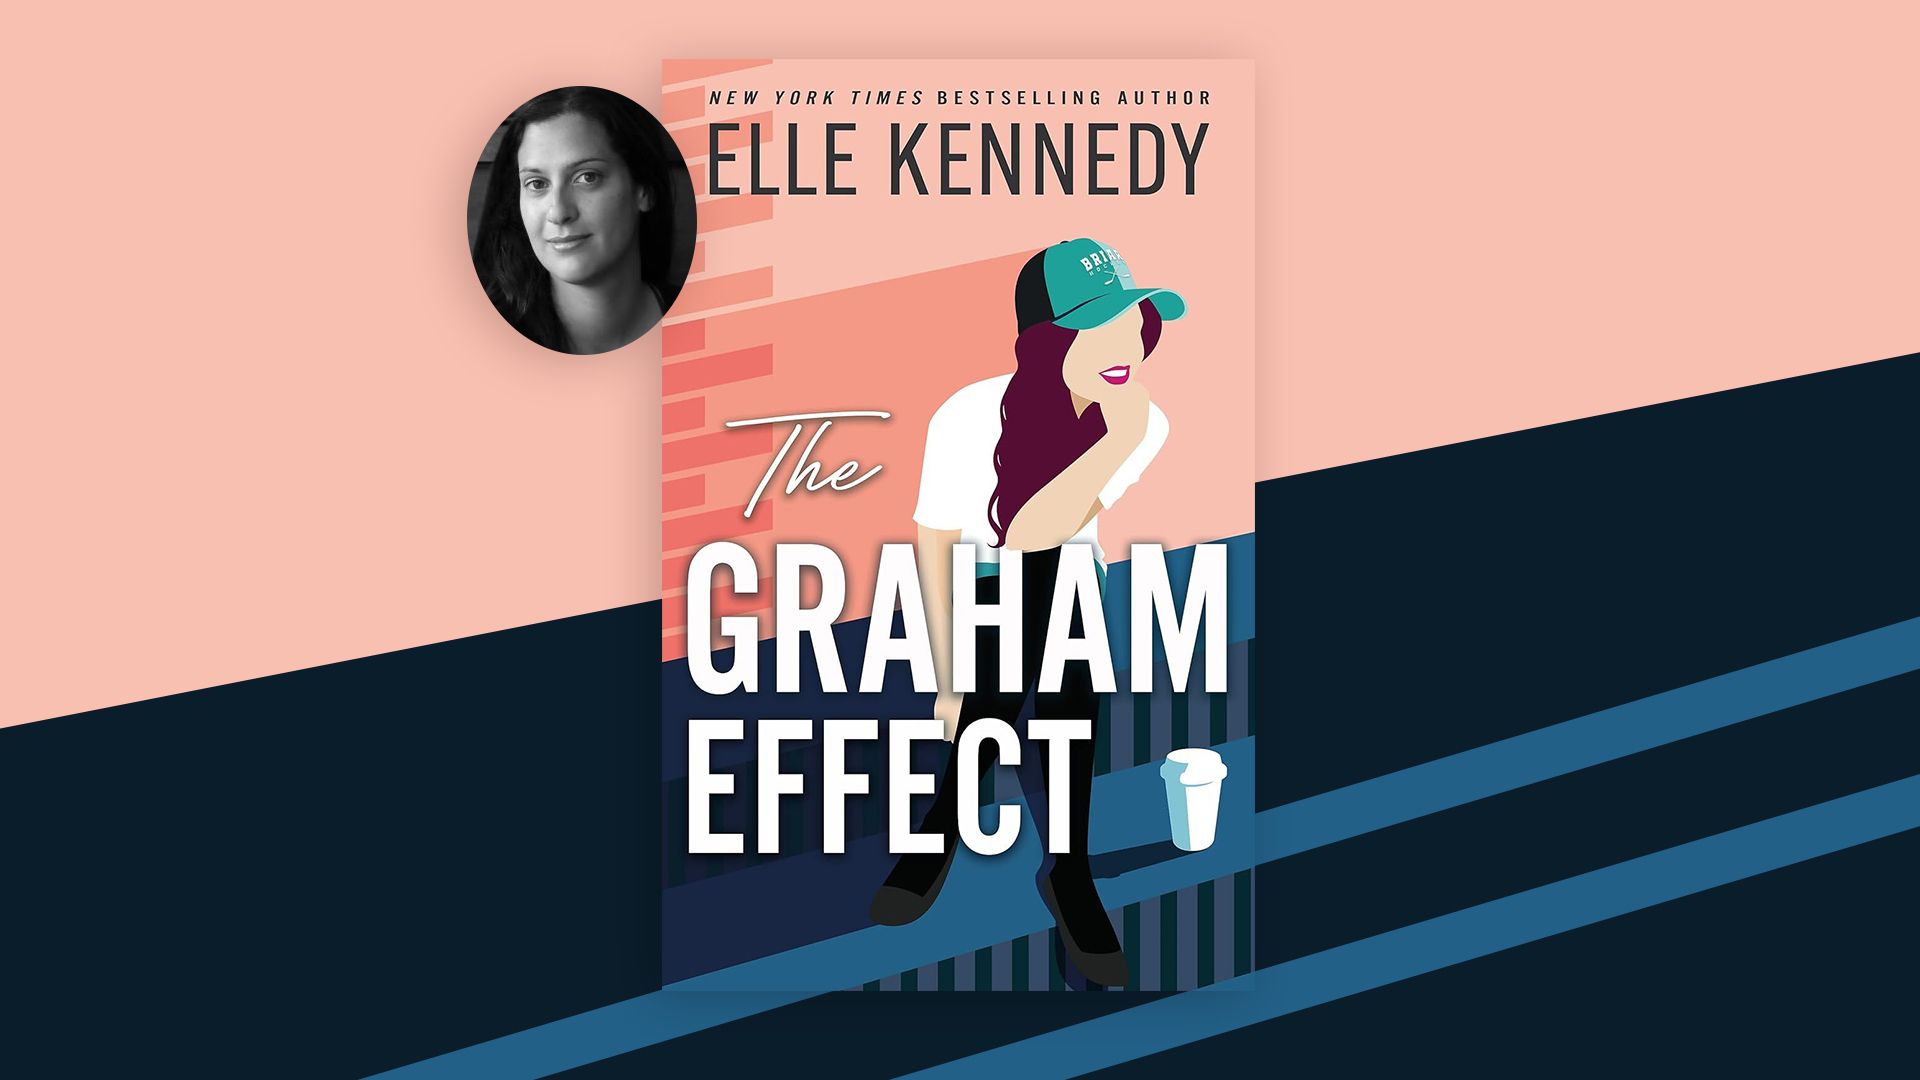 Elle Kennedy on why hockey books are so popular, and fancasting Jacob Elordi and Nicholas Galitzine